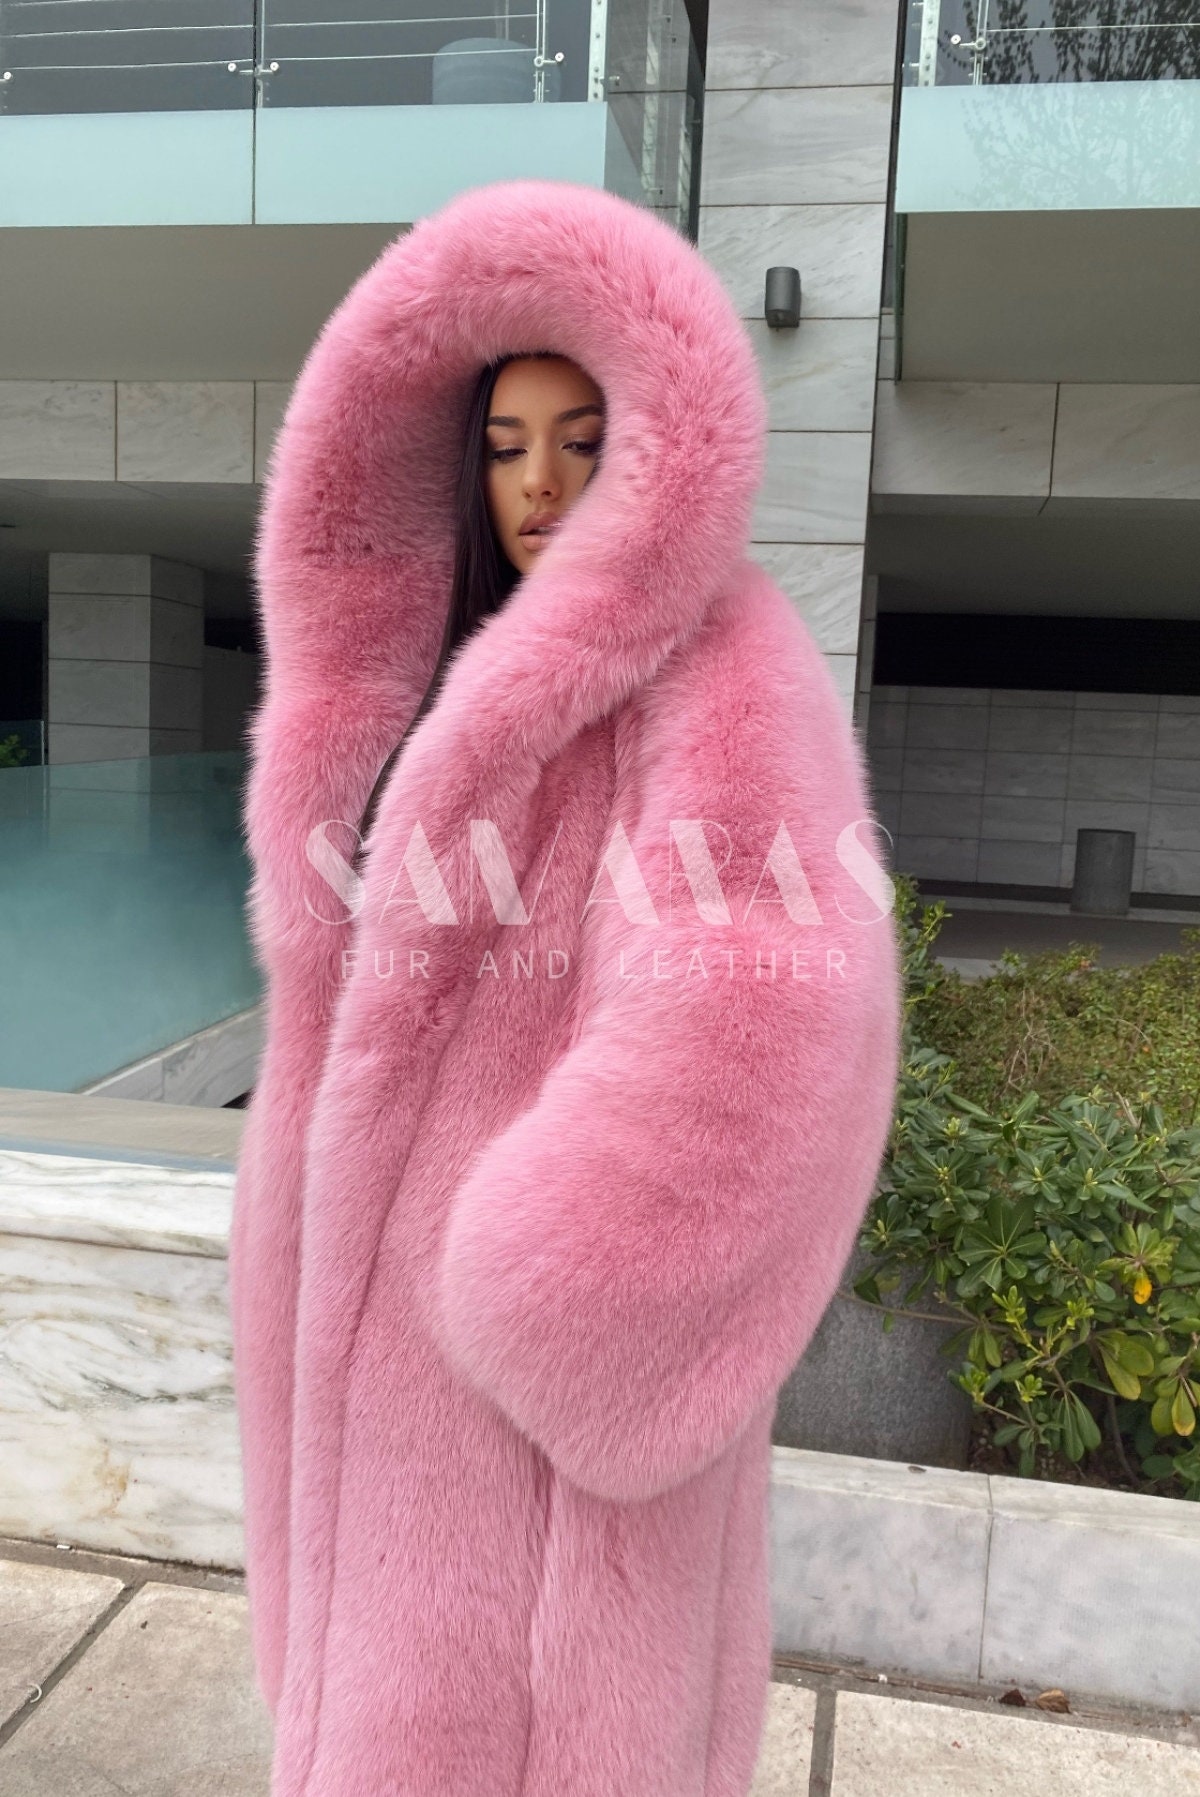 LUXURY PINK FOX Fur Coat With Whole Skins, Fur Jacket,fox Fur Coat/jacket,  Cozy, Warm Luxury Fur,perfect Gift, Present, Real Fur Jacket 